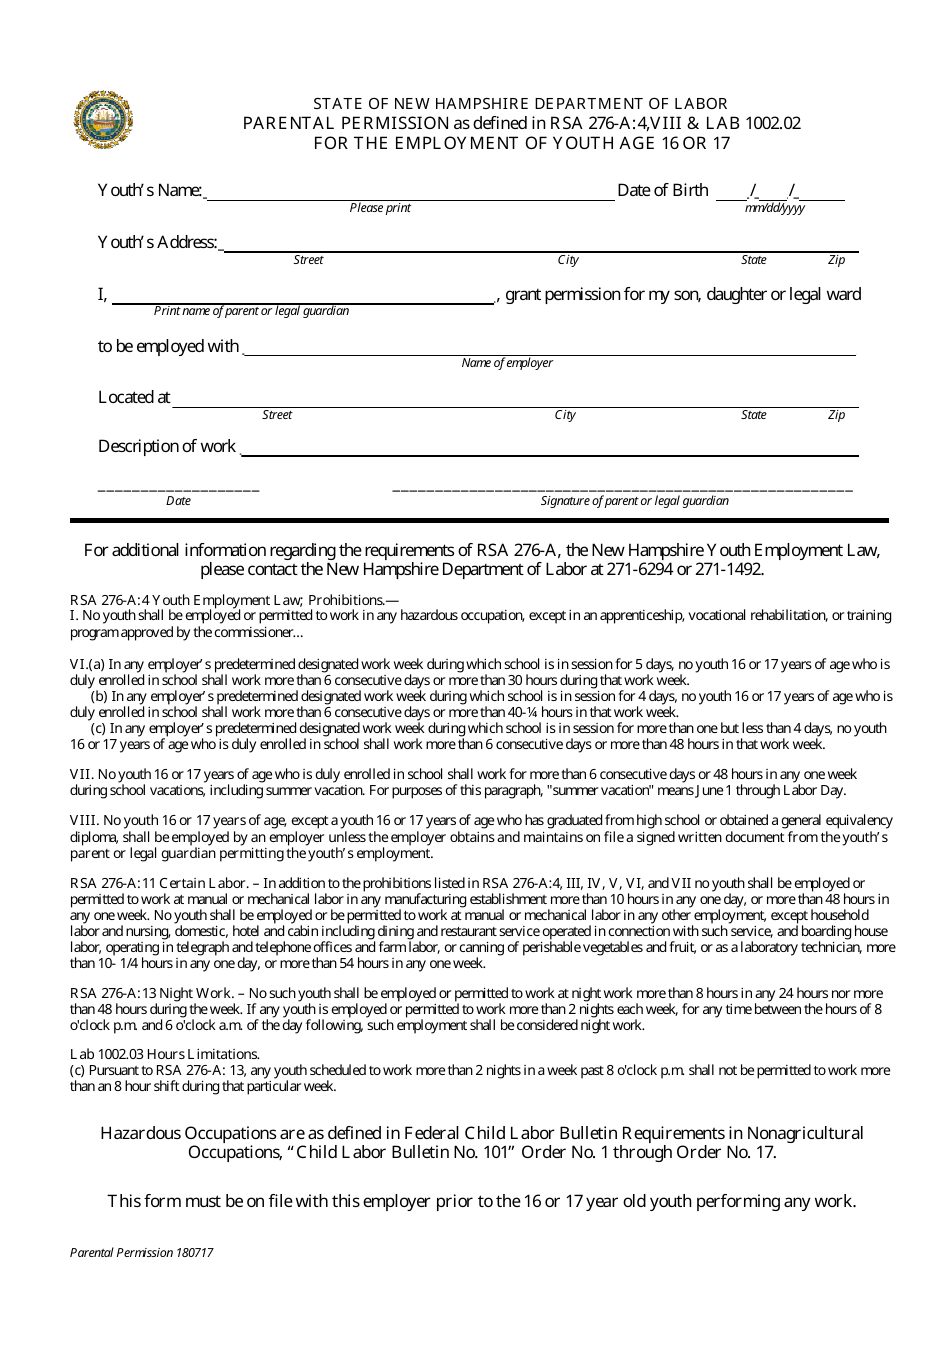 Parental Permission for the Employment of Youth Age 16 or 17 - New Hampshire, Page 1